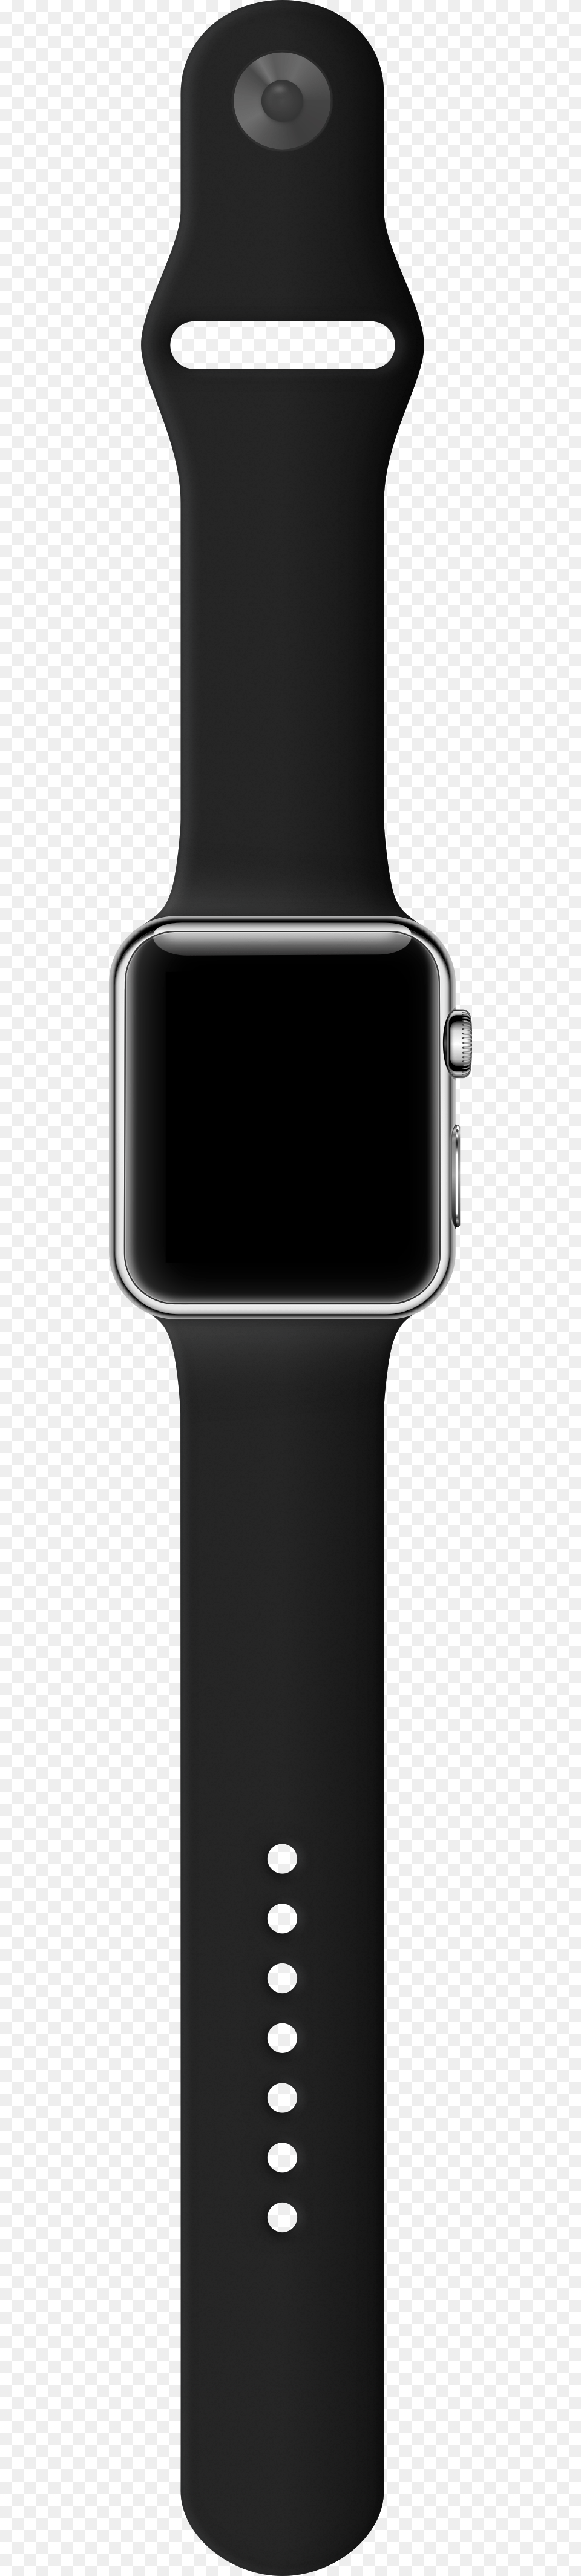 Apple Watch Open Band, Wristwatch, Arm, Body Part, Person Png